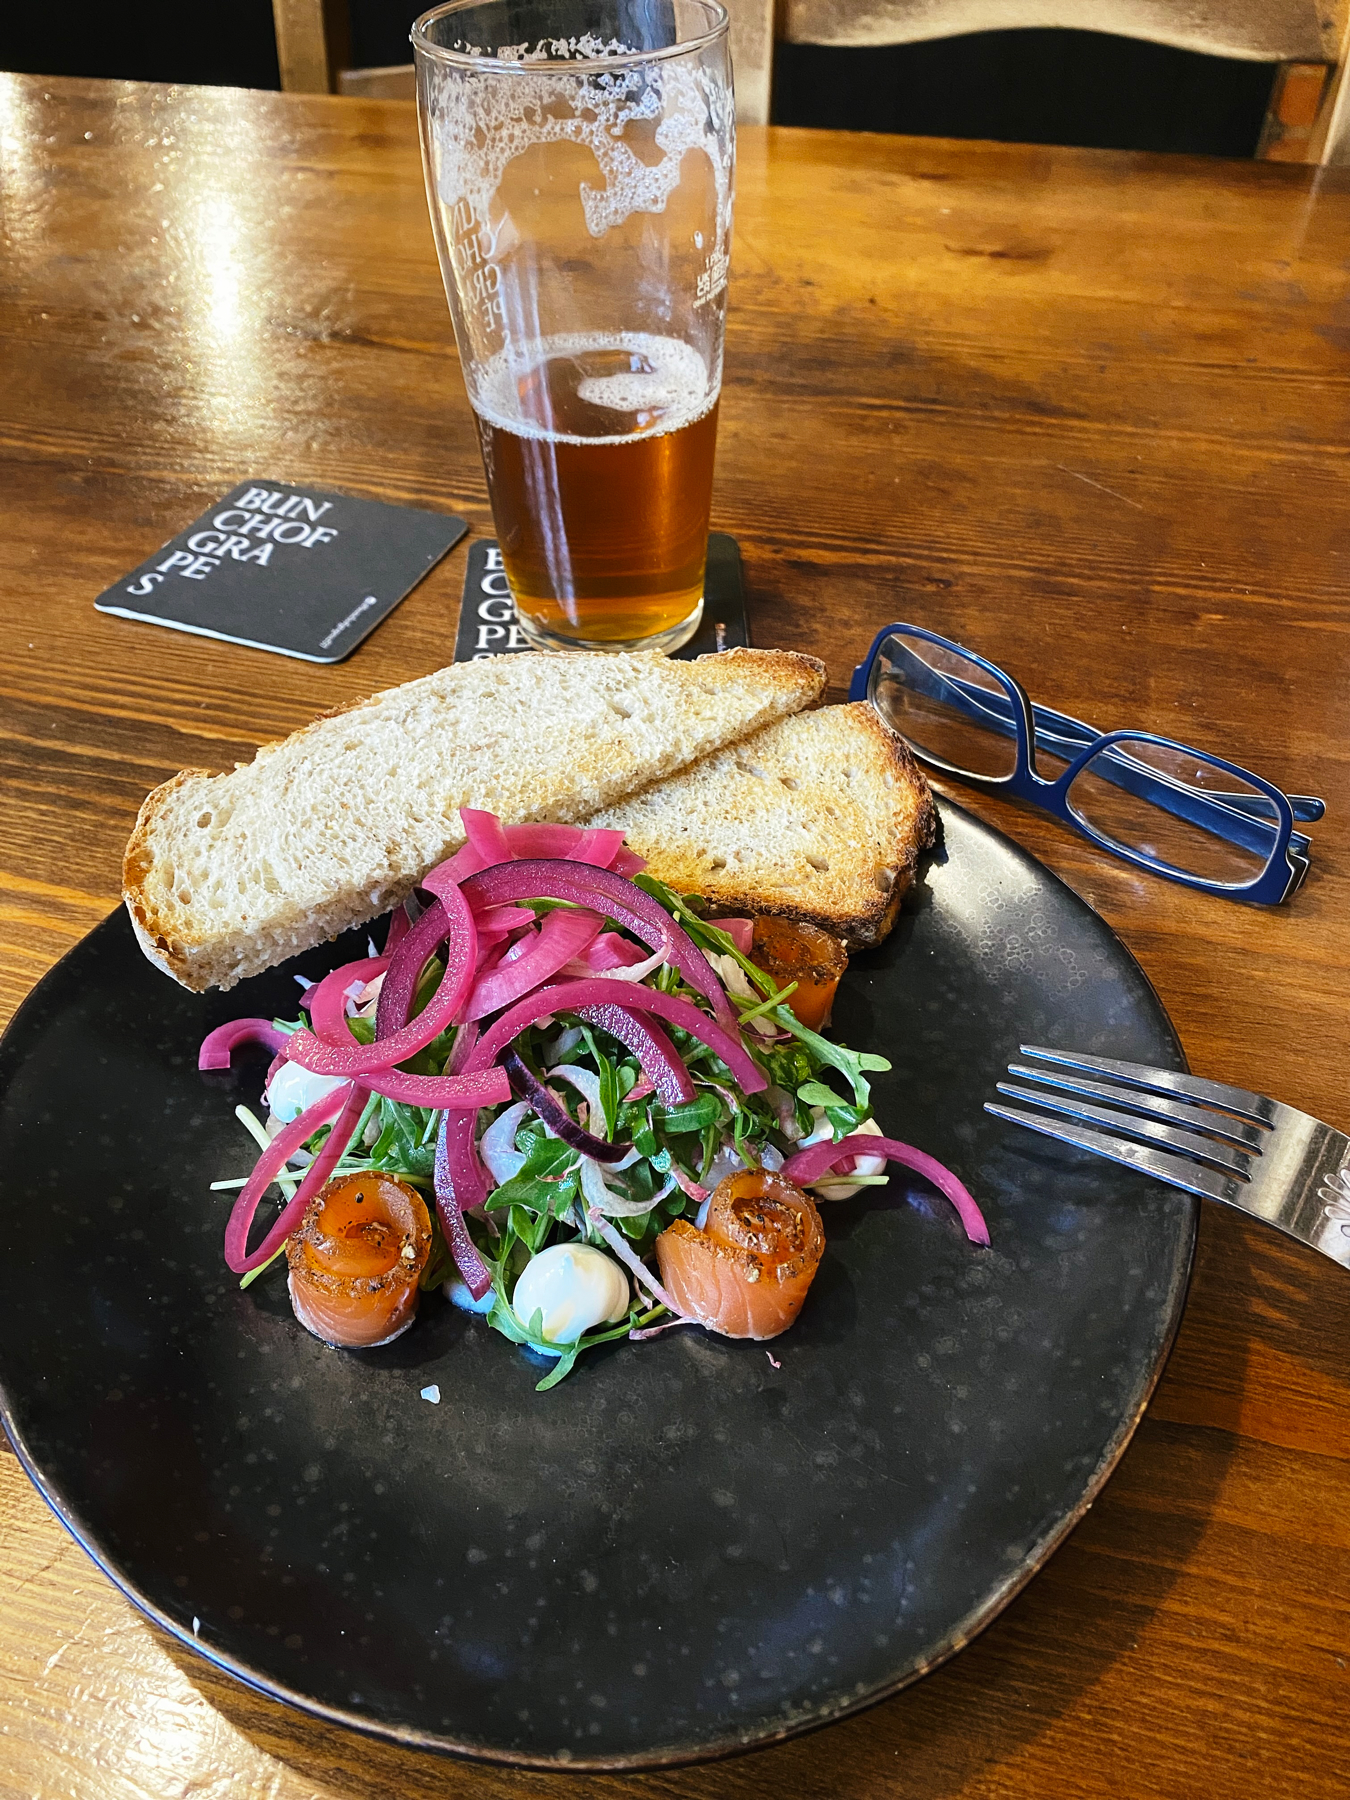 Plate of cured salmon with salad and toasted bread